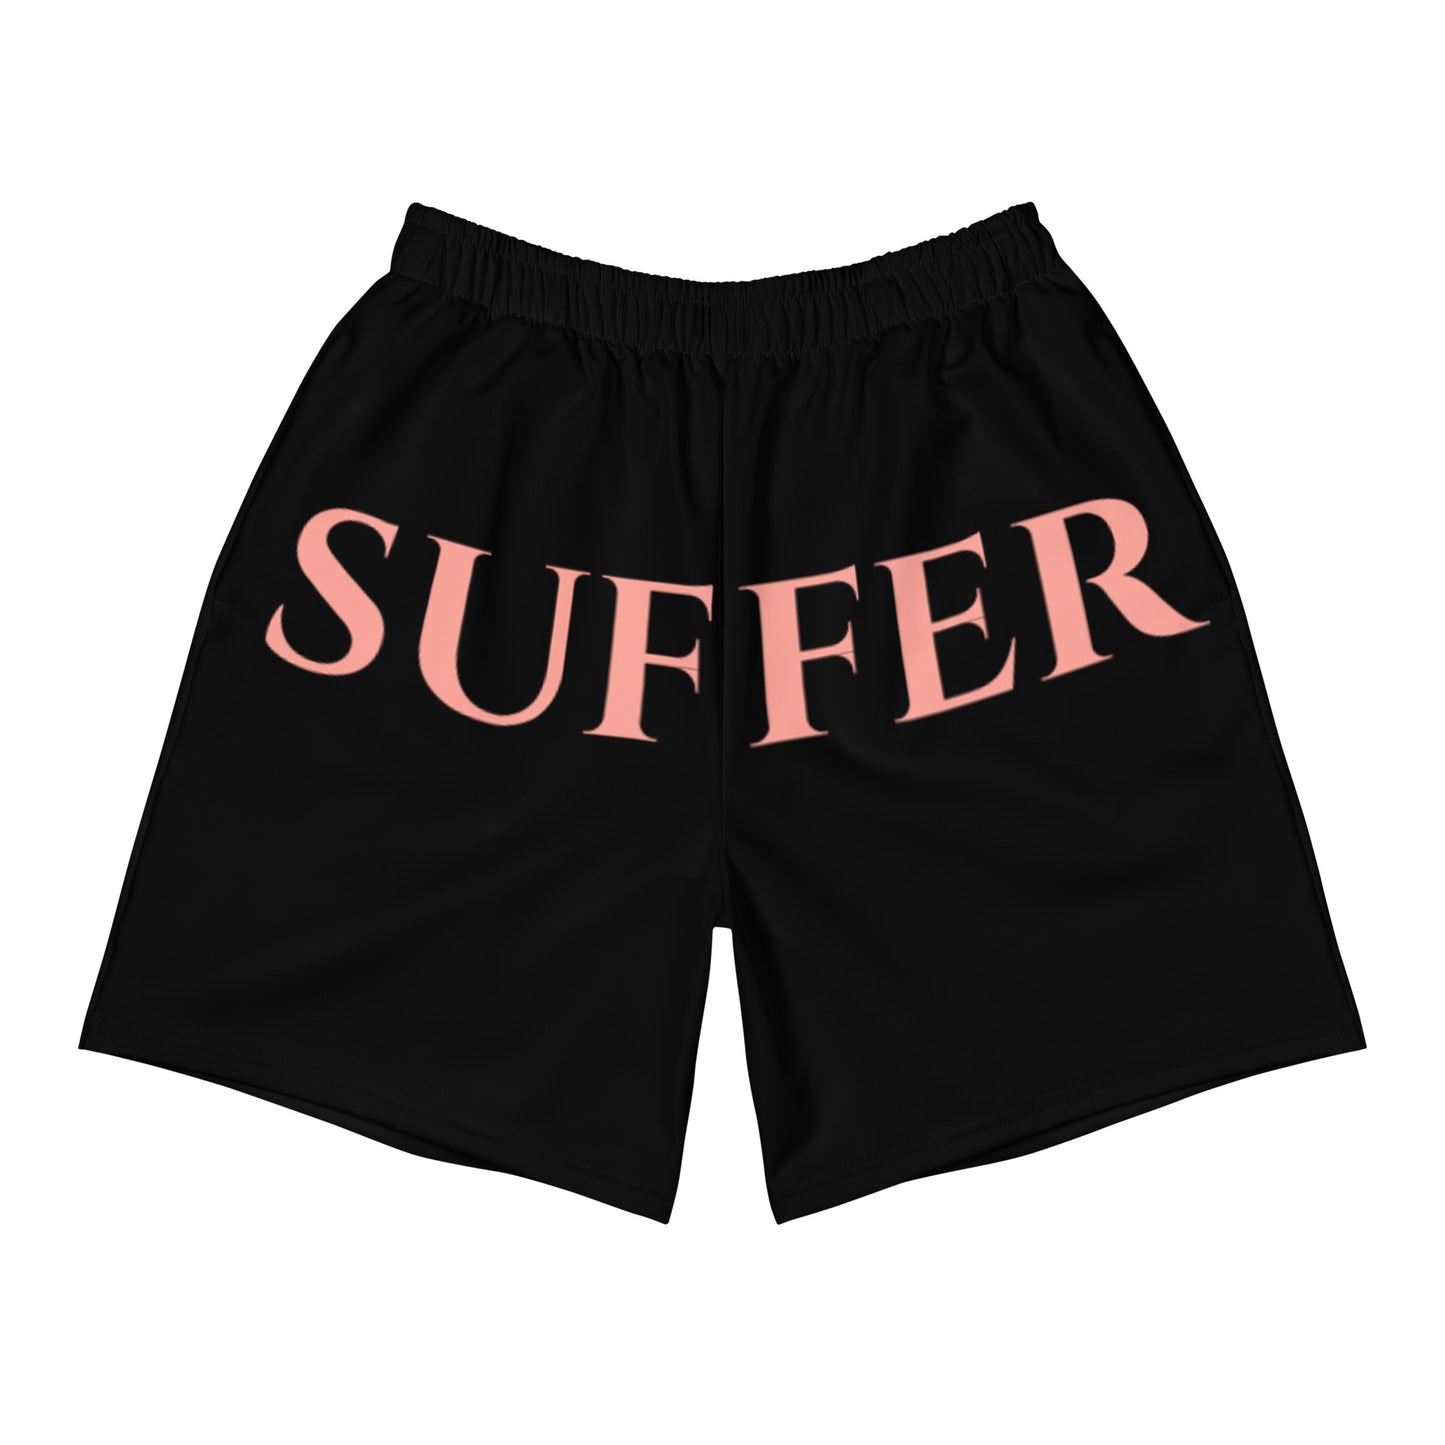 Blk/Dusty Rose Hip Suffer Athletic Shorts